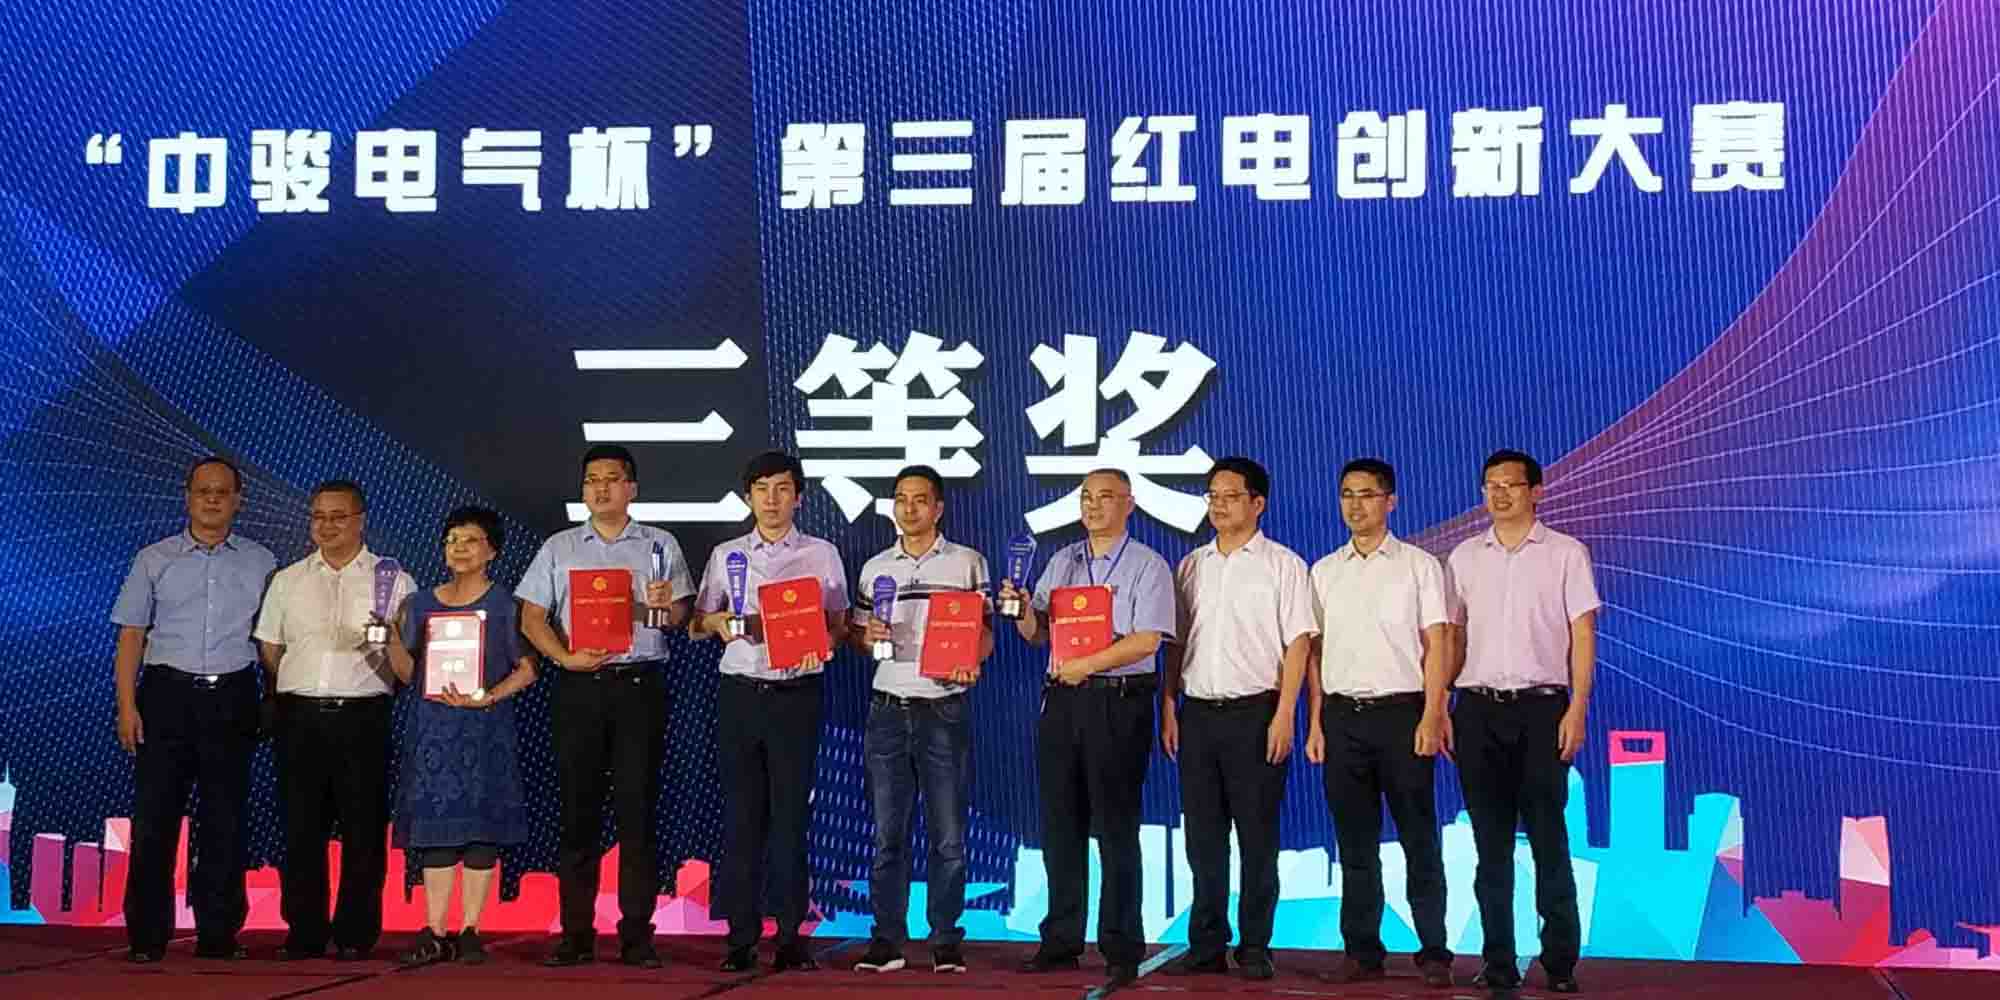 Congratulations on the company's non-polar low-voltage circuit breaker project won the third prize of the Red Power Innovation Competition and the project landing signing